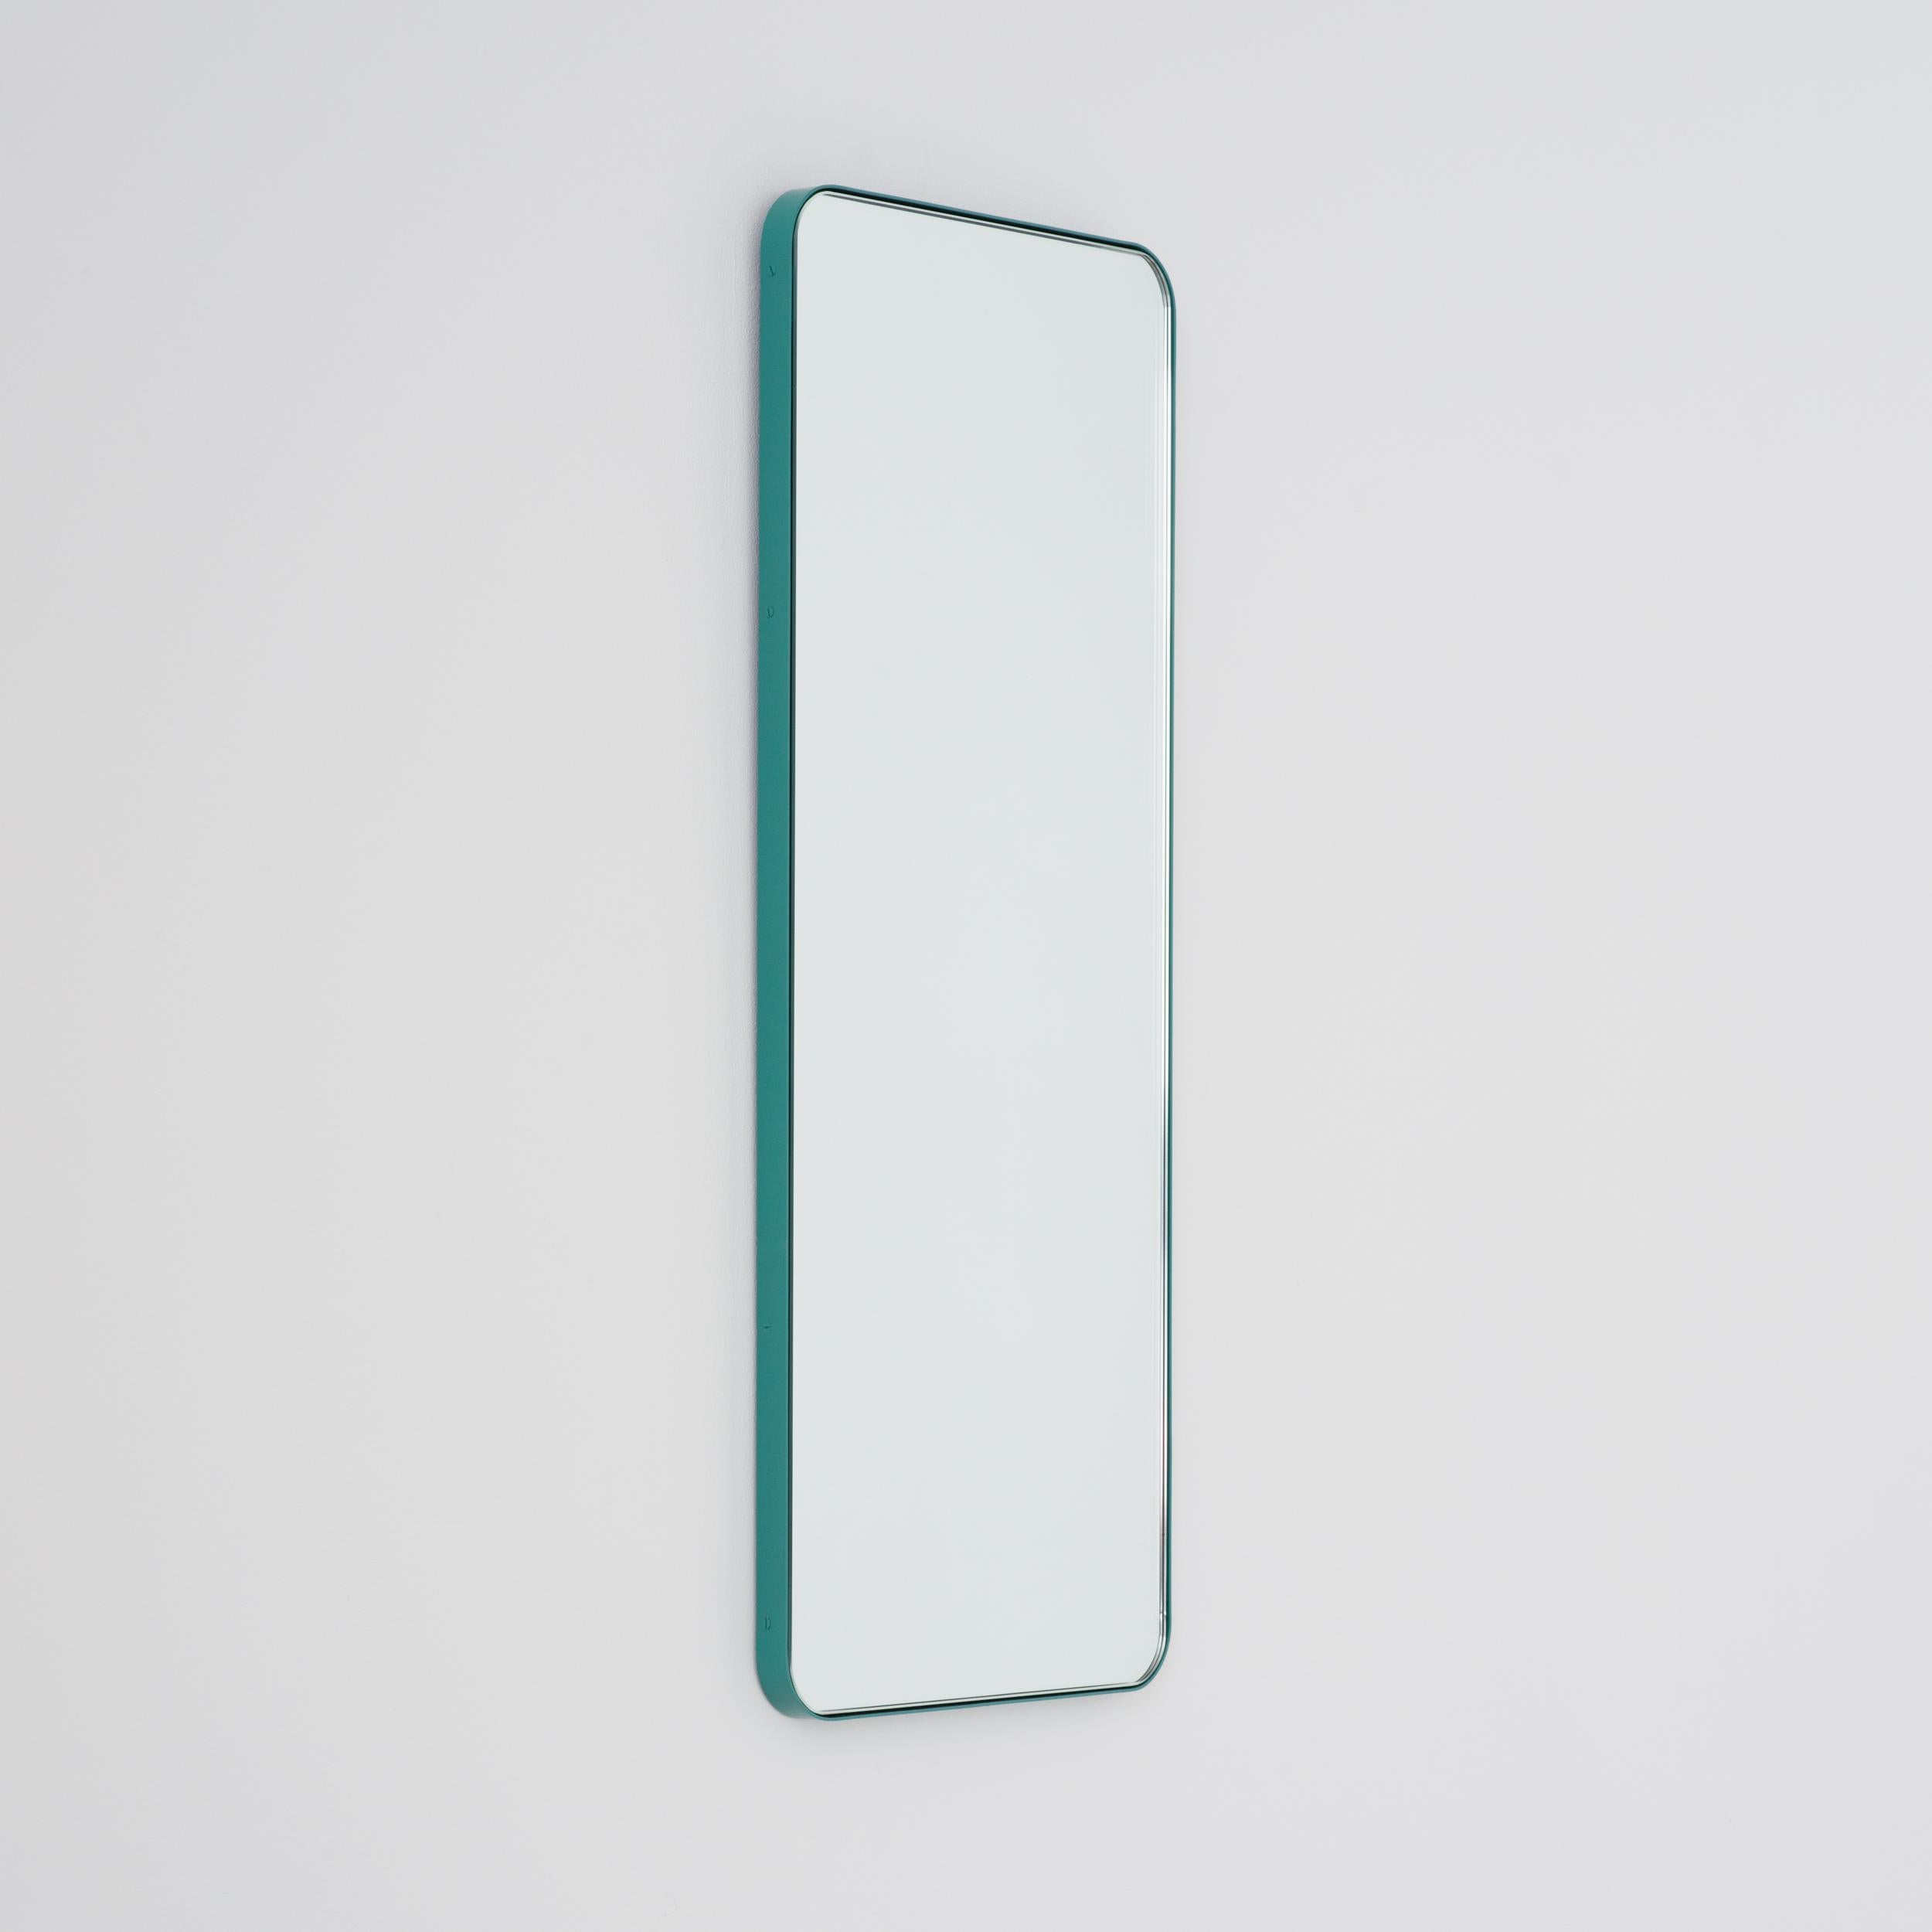 Organic Modern In Stock Quadris Rectangular Mirror with Mint Turquoise Frame, Small For Sale